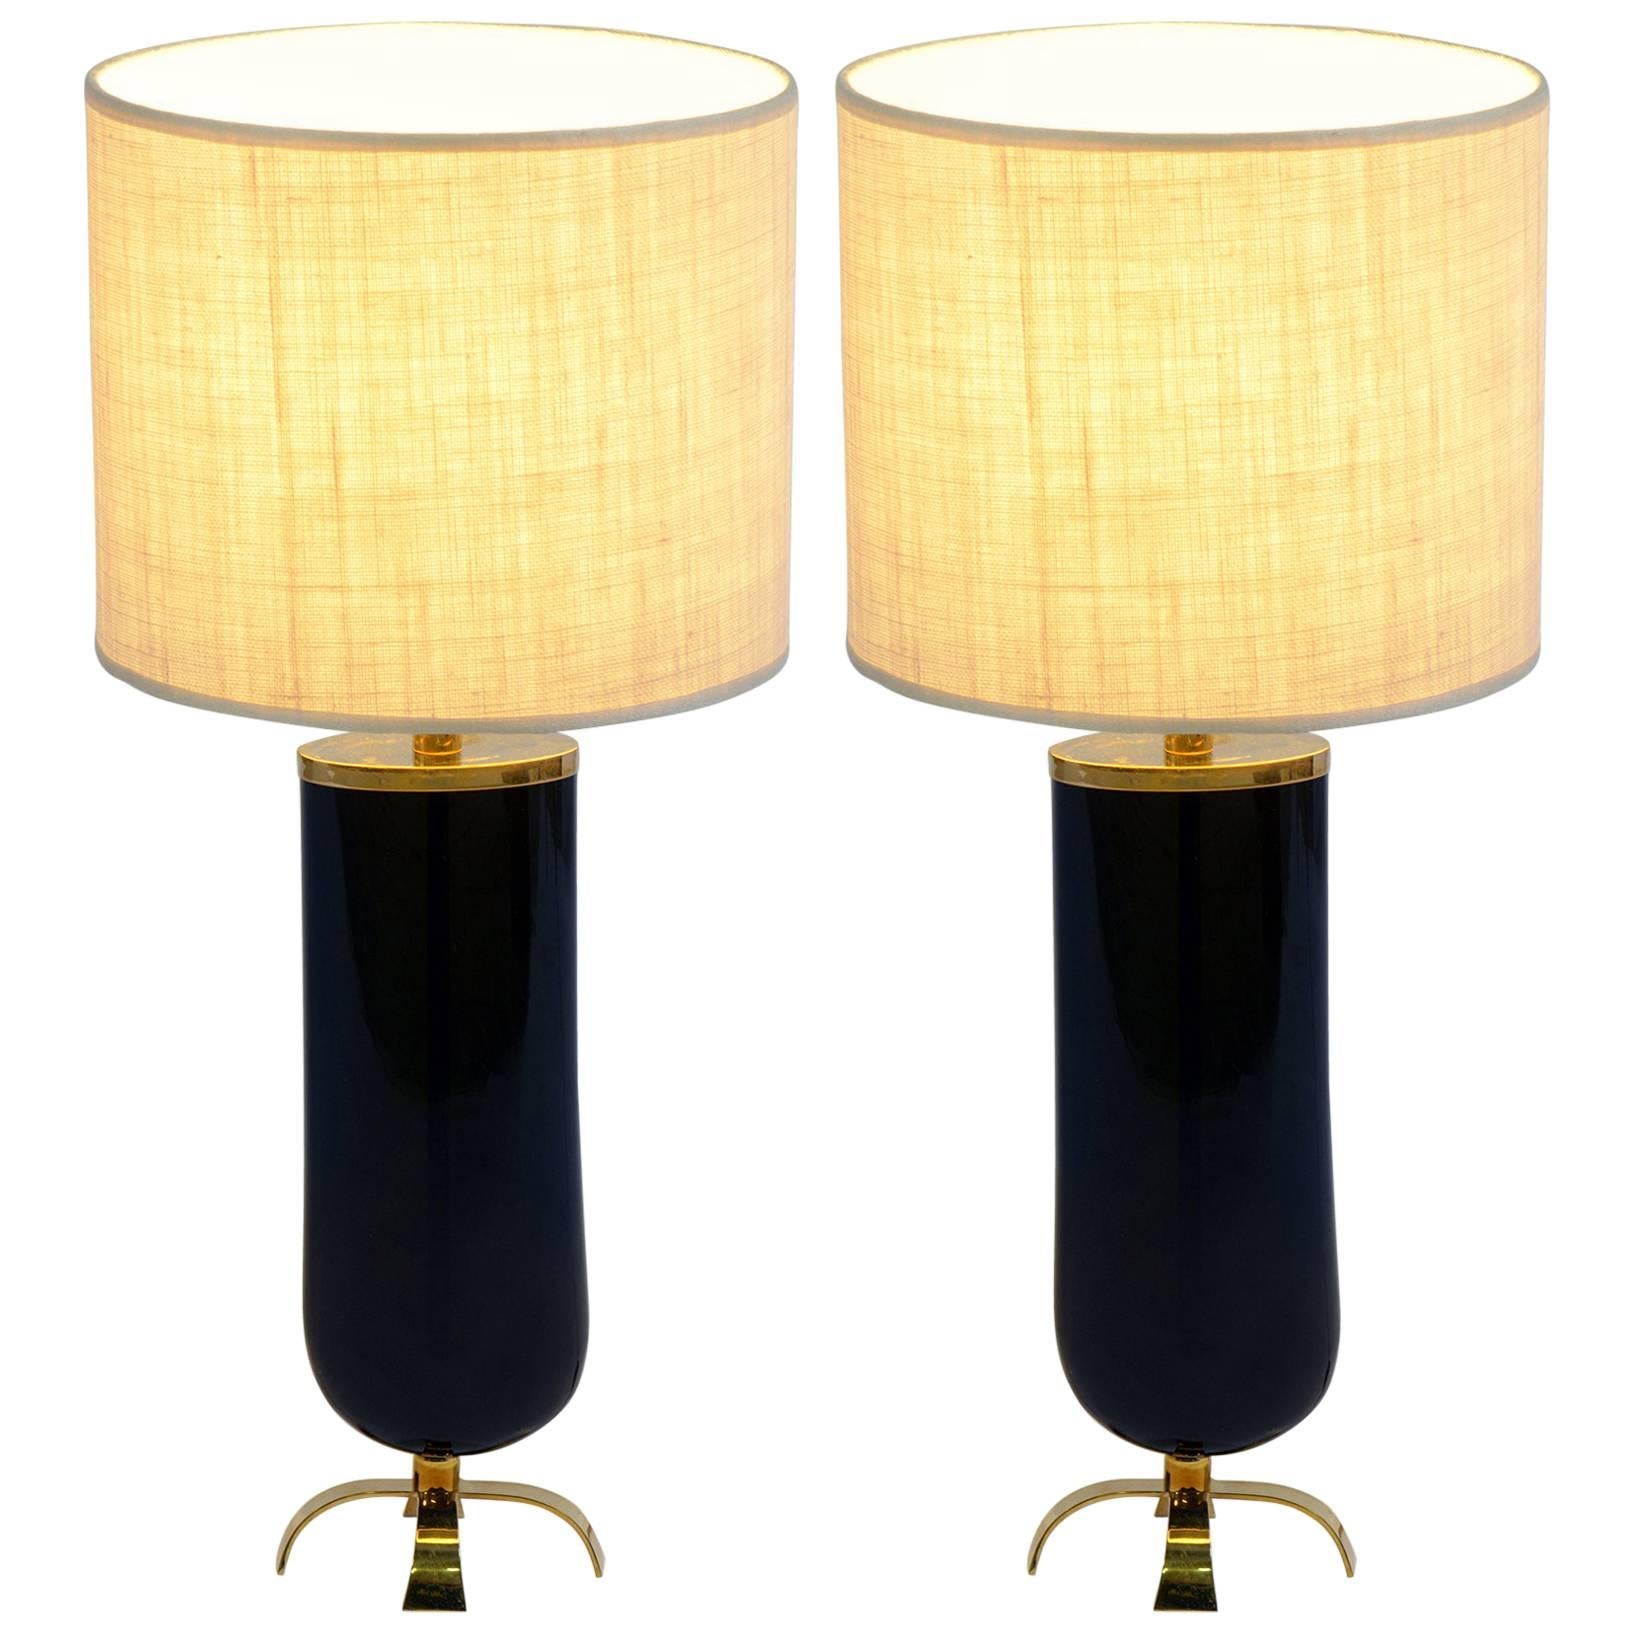 Pair of Midcentury Oval Murano Glass Table Lamps by Cenedese, Signed